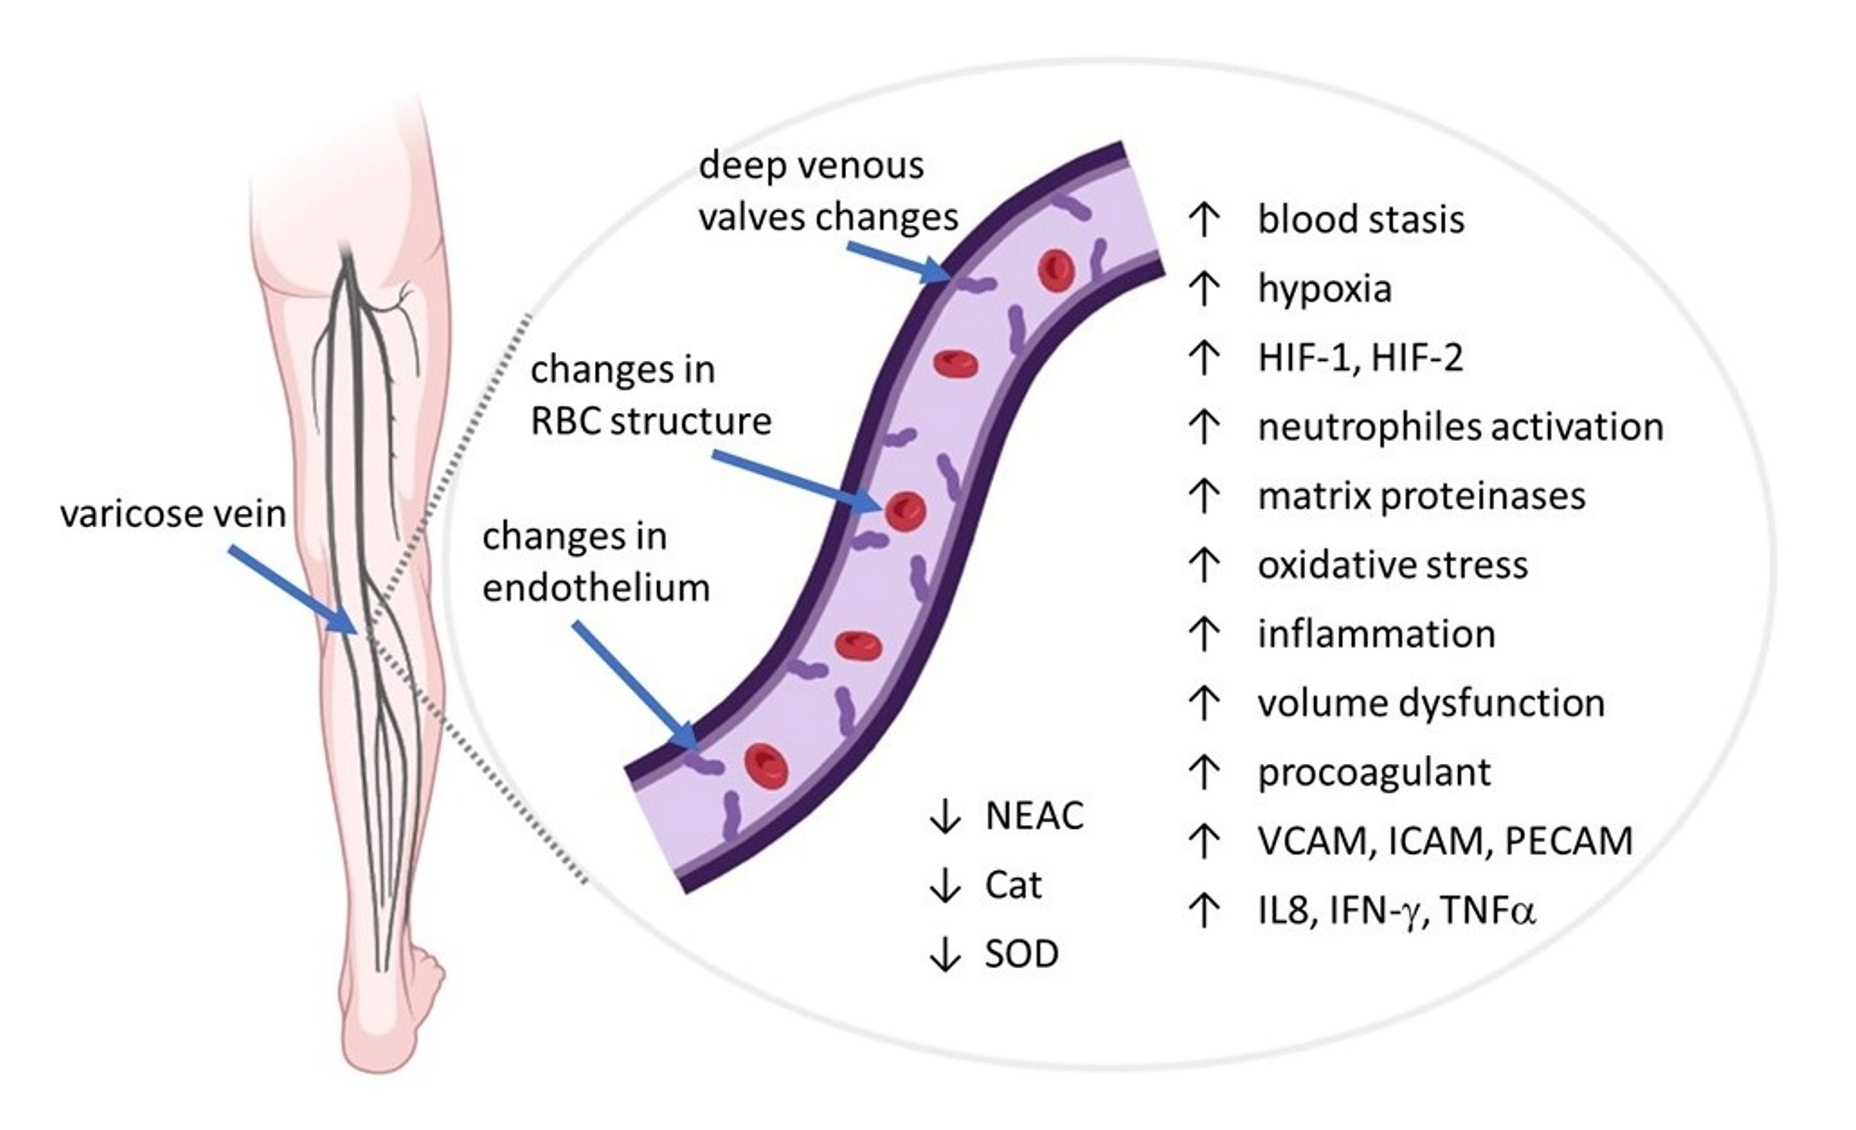 CEAP C2: varicose vein patient, a 40-year-old male, was operated on in